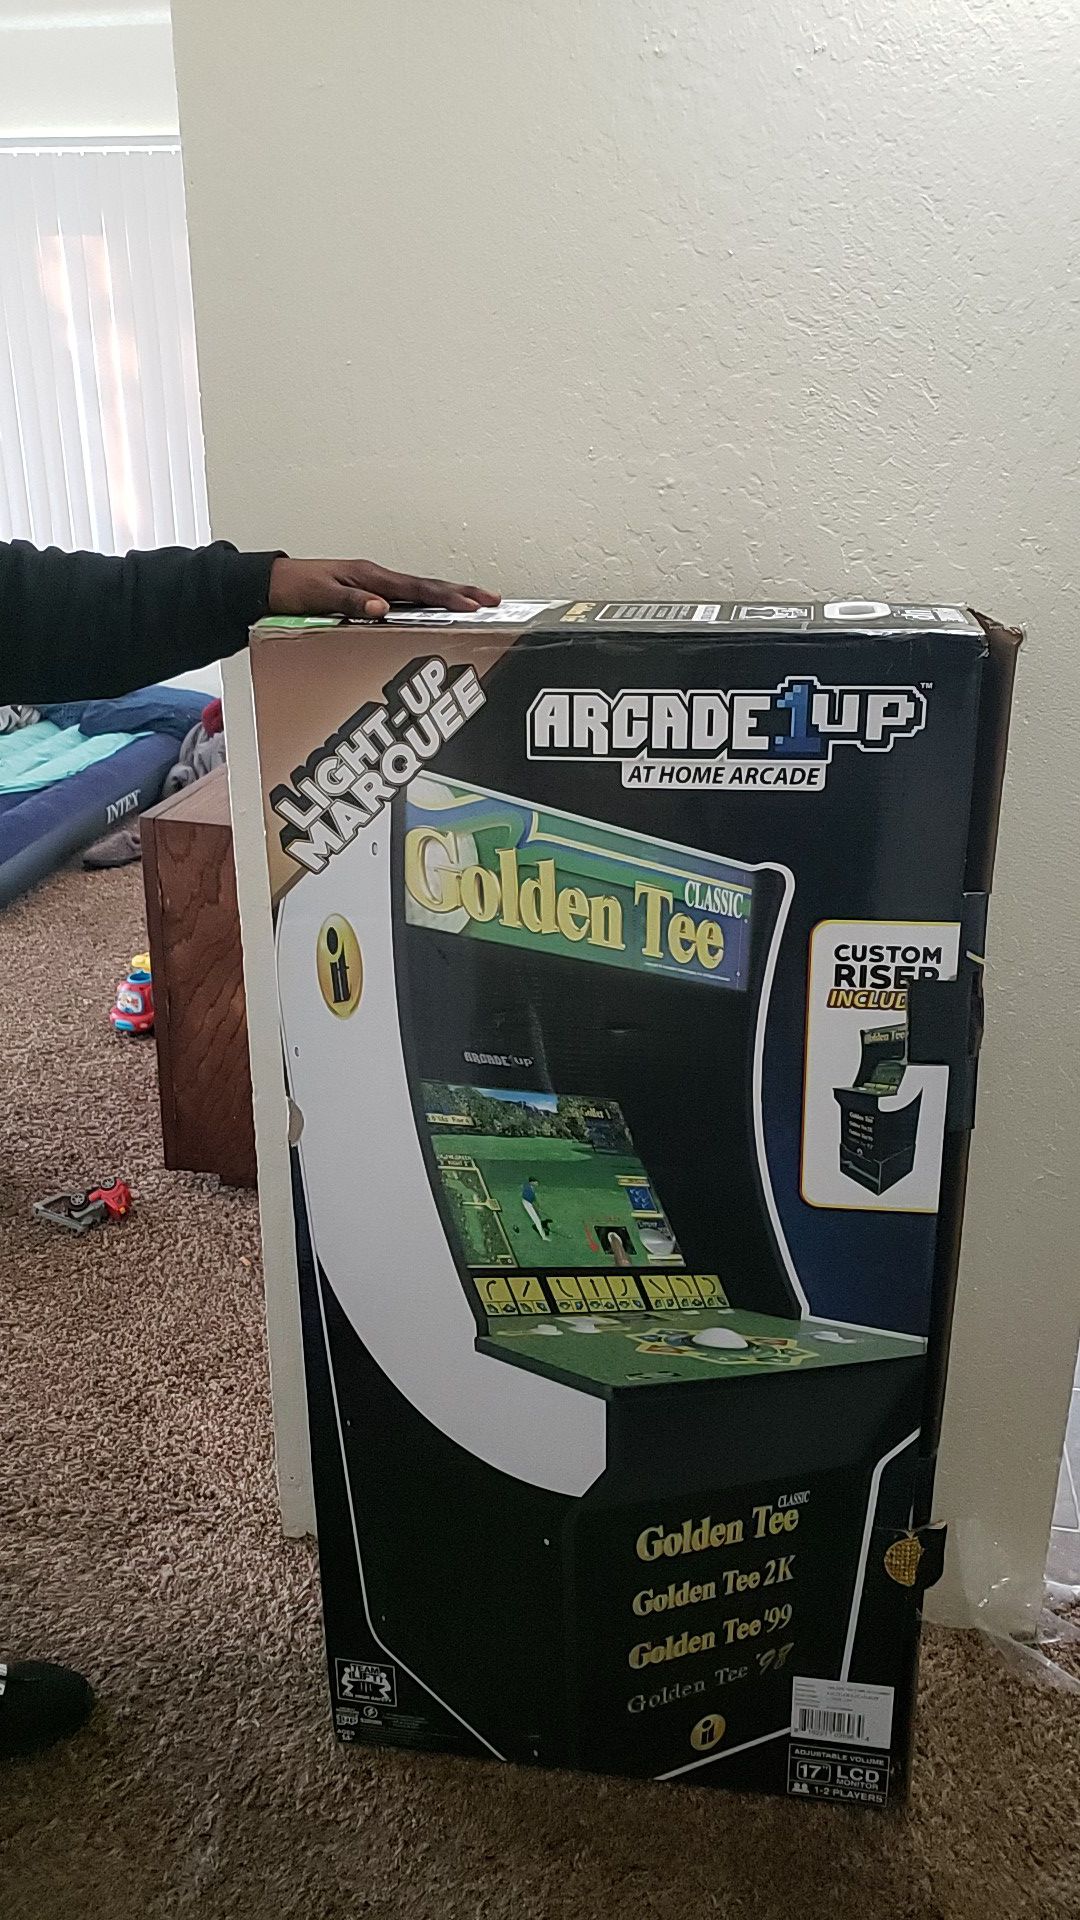 Golden tee arcade game brand new in the box